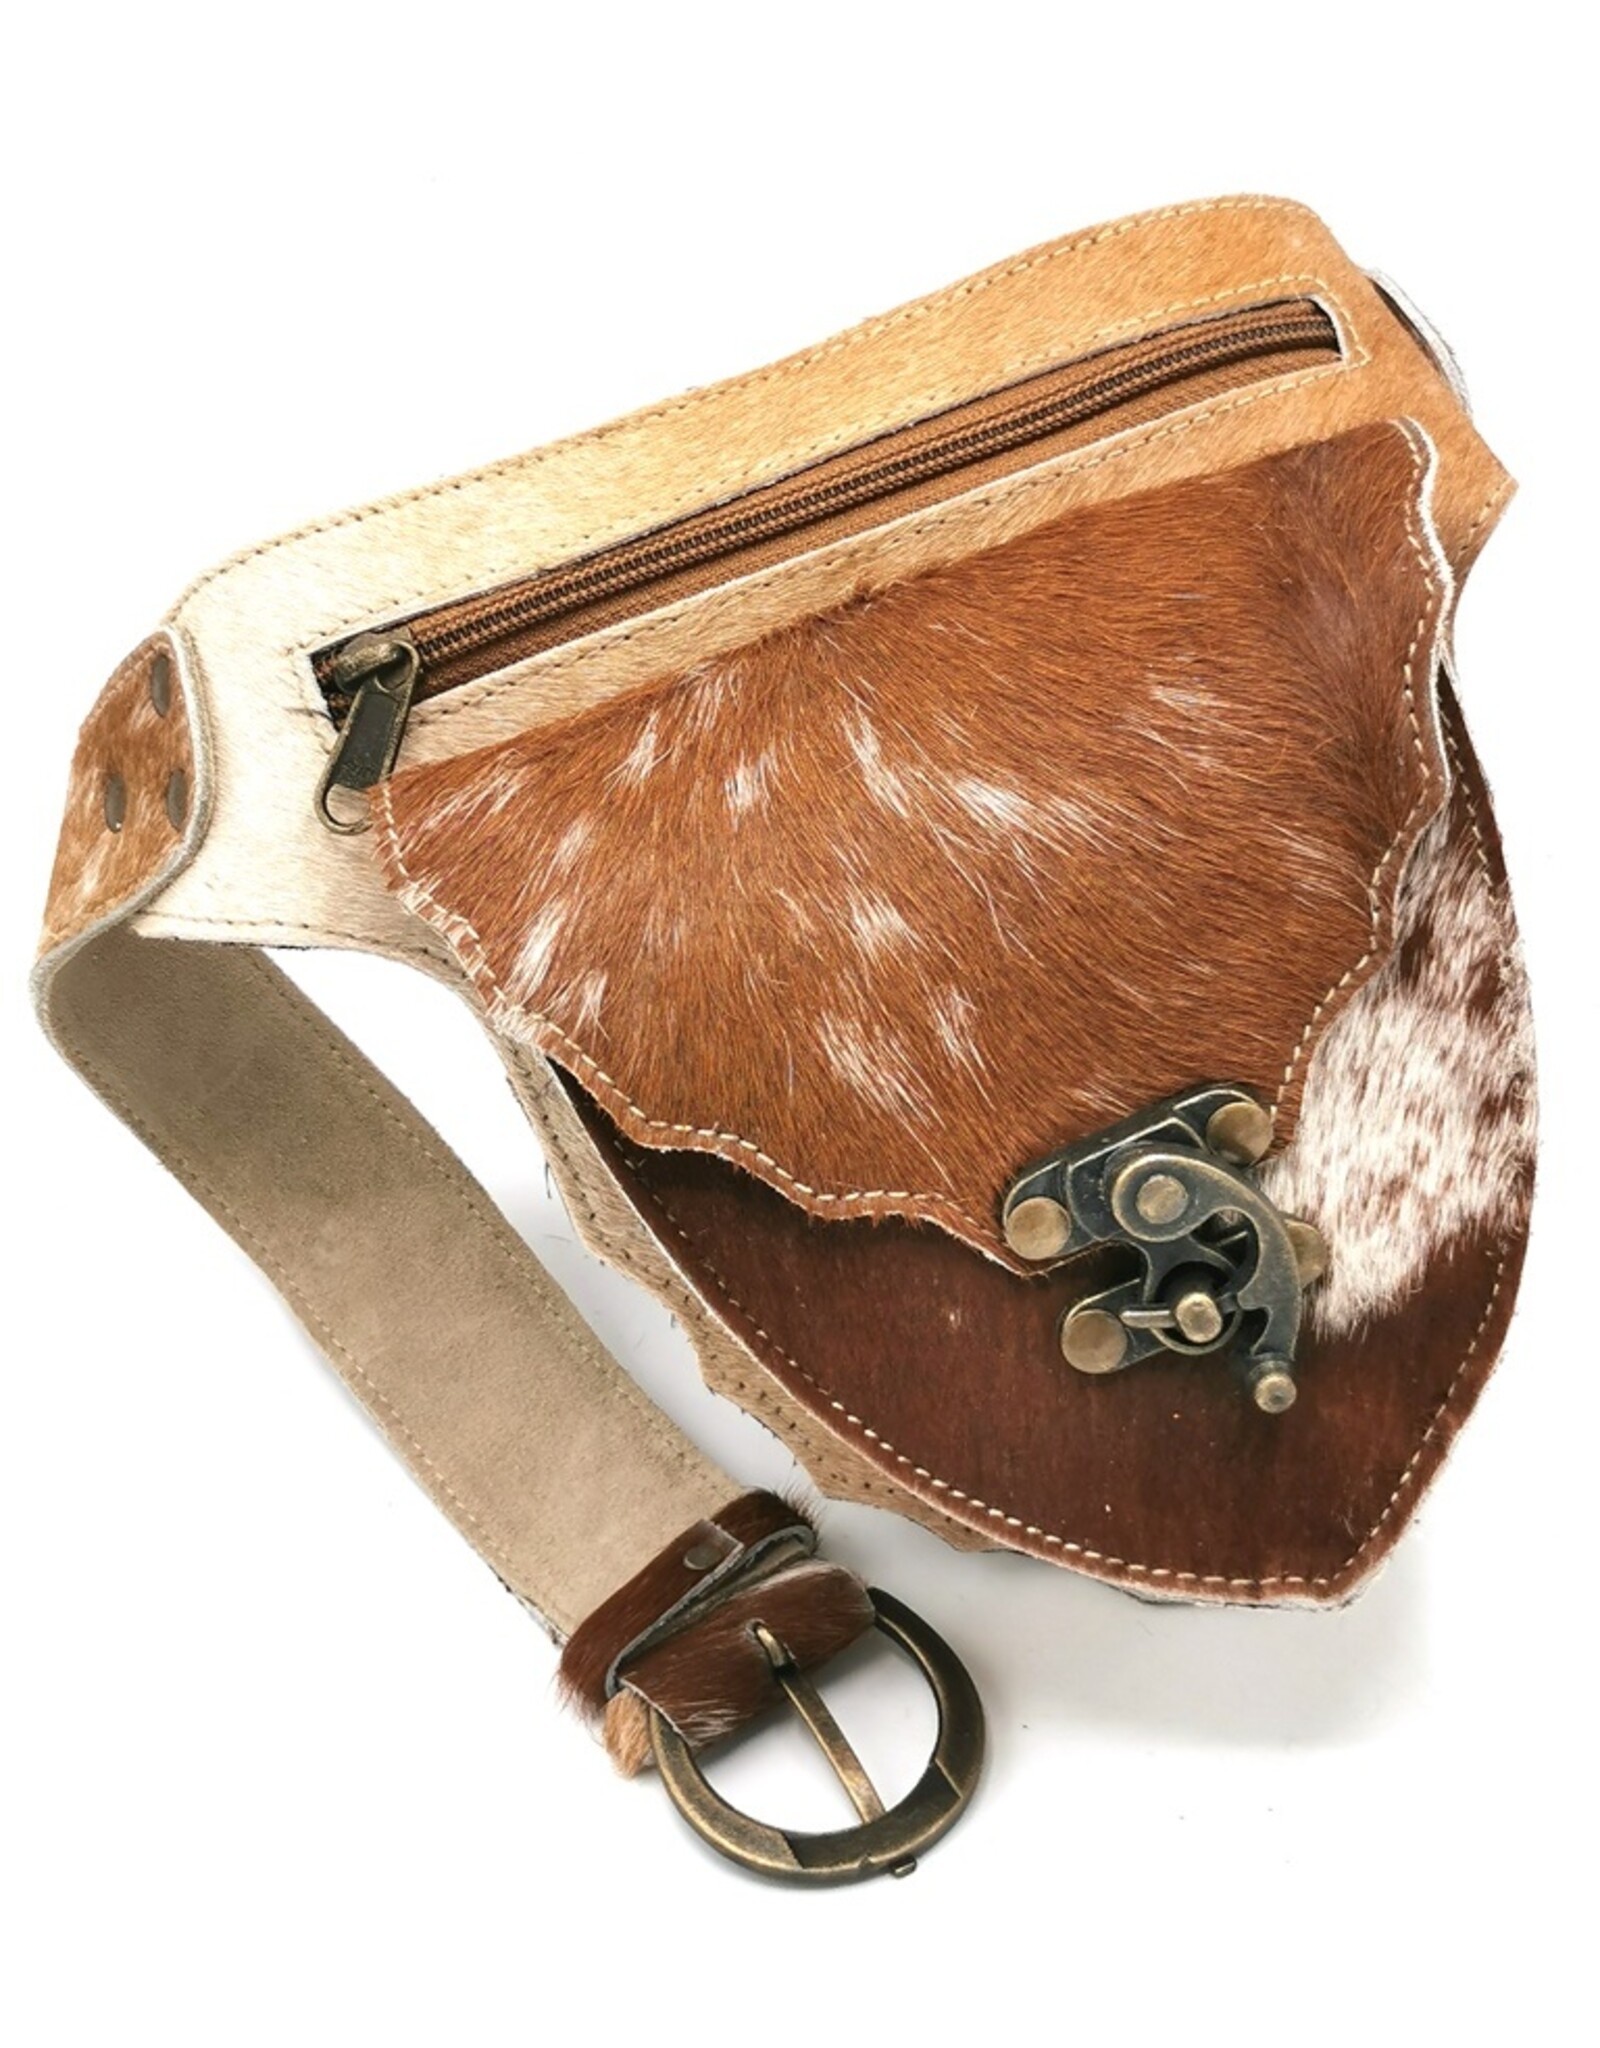 Trukado Leather Festival bags, waist bags and belt bags -  Leather waist bag cowhide Ibiza Style